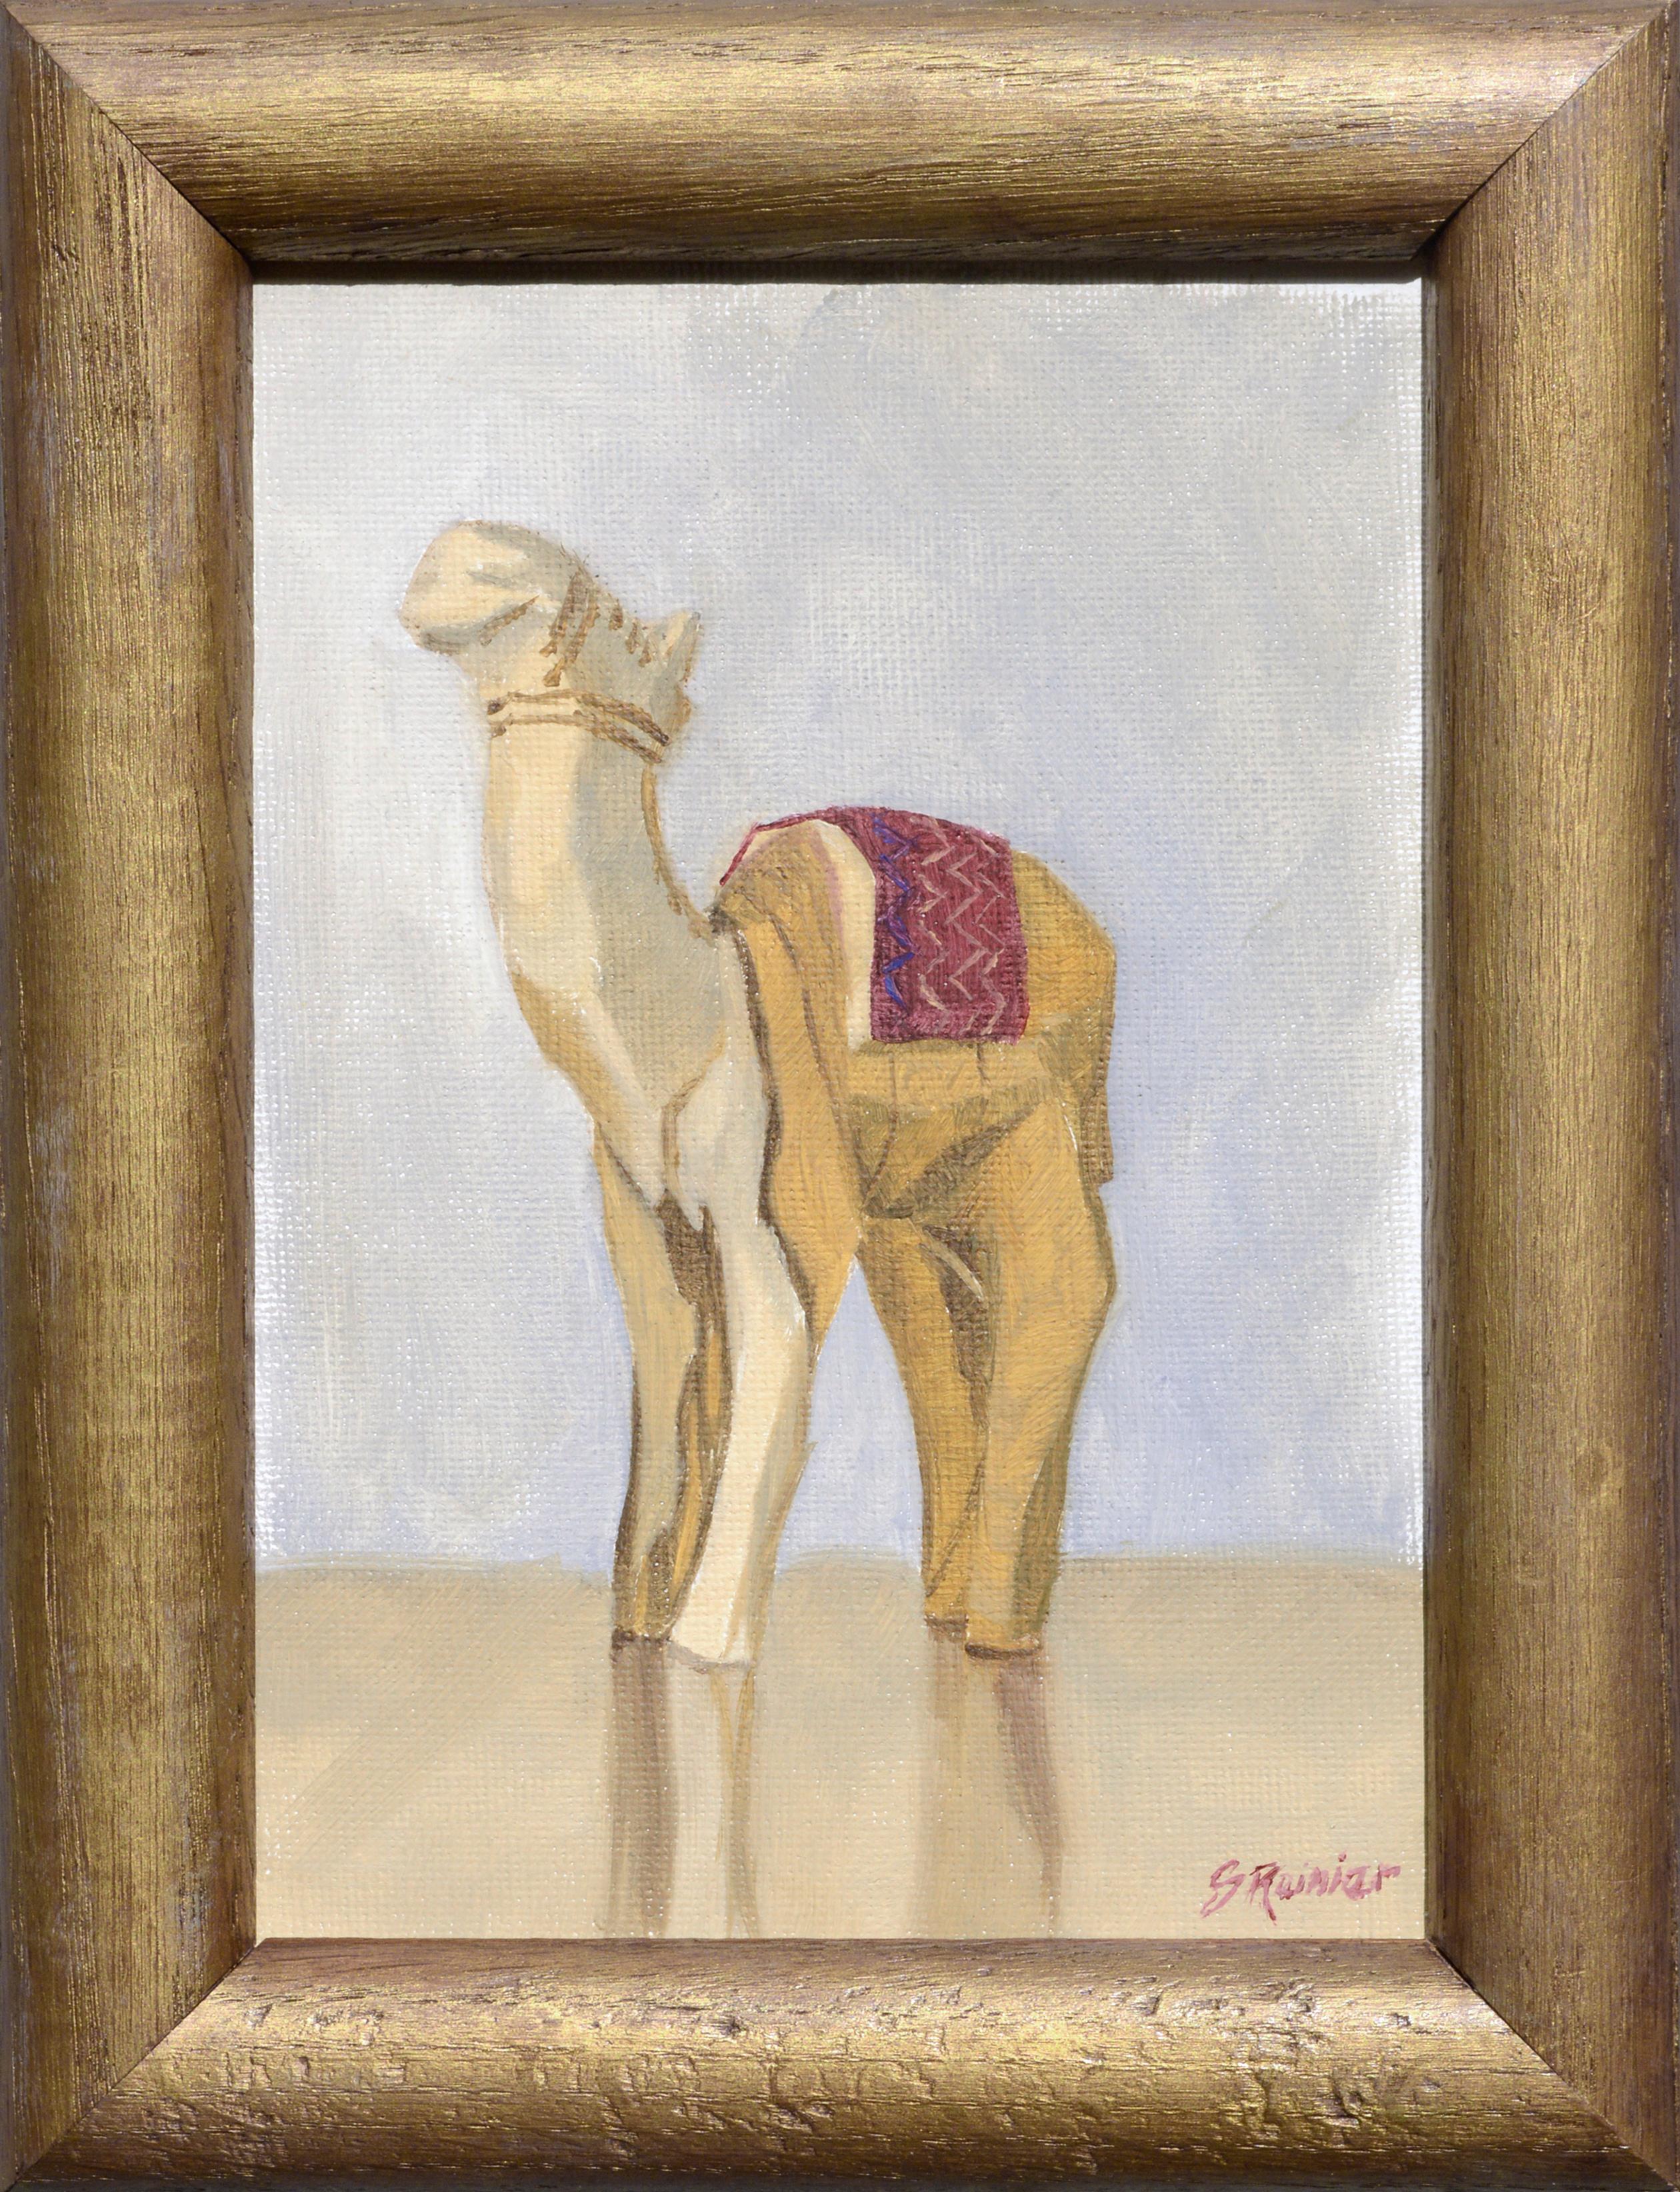 Playful representation of a wooden toy camel by Susan Reinier (American, b. 1978). Signed 